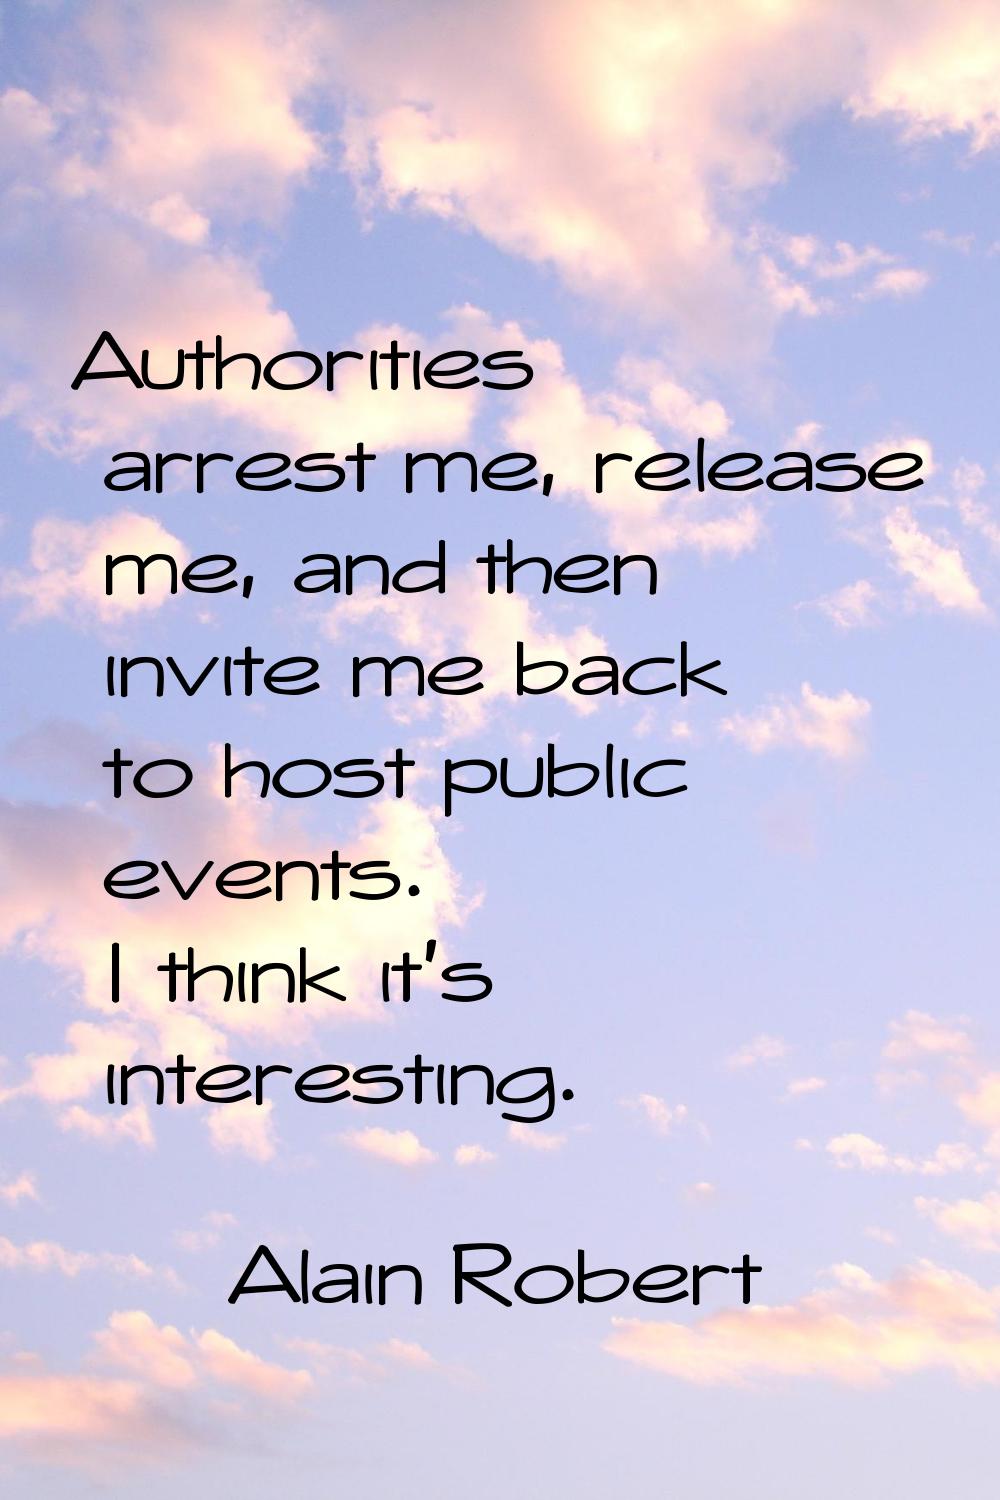 Authorities arrest me, release me, and then invite me back to host public events. I think it's inte